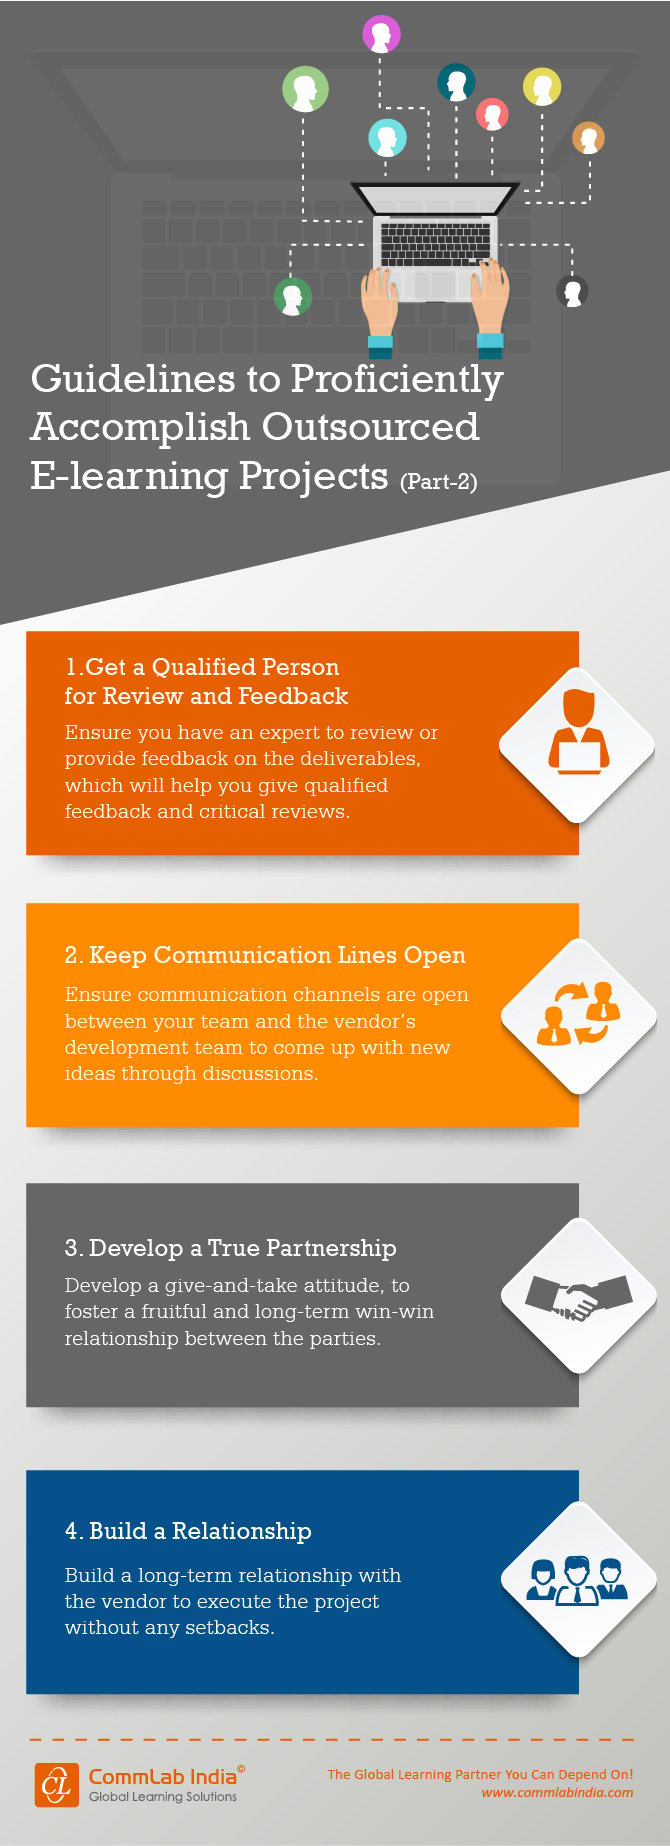 Guidelines to Accomplish Outsourced E-learning Projects Part-2 [Infographic]